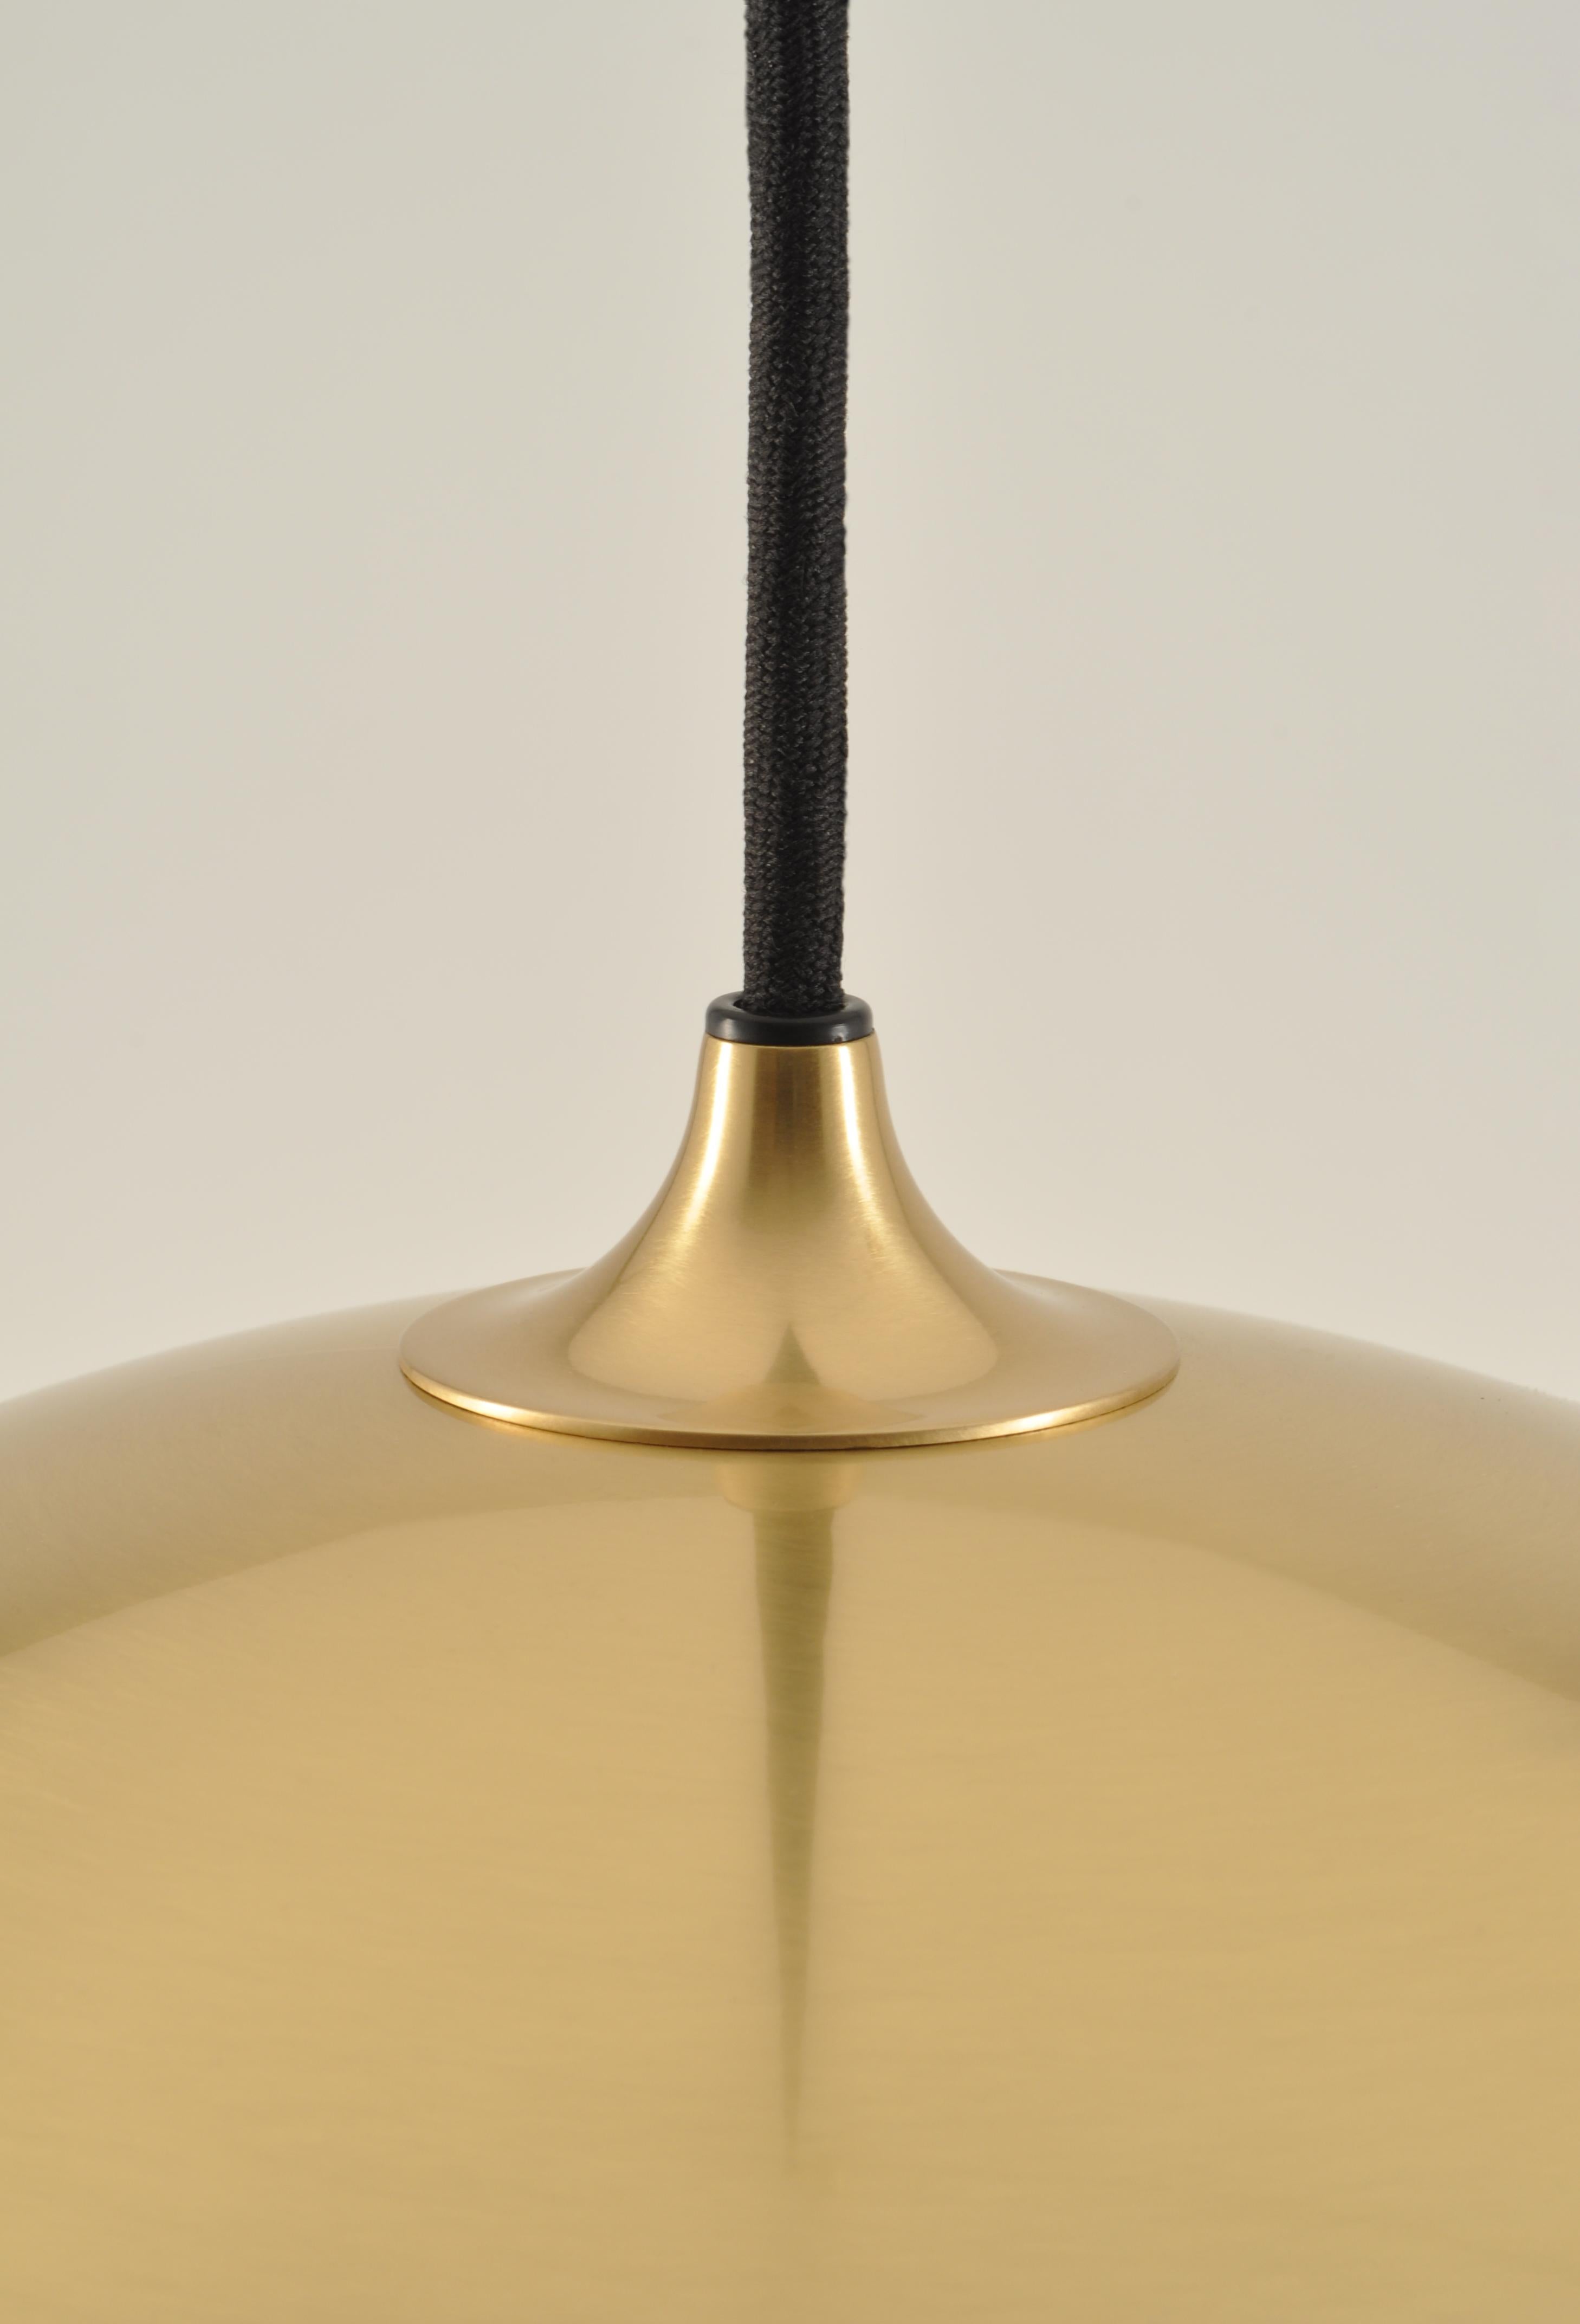 Iconic design by Florian Schulz and Jens Schump. This lamp is in perfect condition and available in nickel or polished brass. The height is adjustable, socket: E27. 

To be on the safe side, the lamp should be checked locally by a specialist